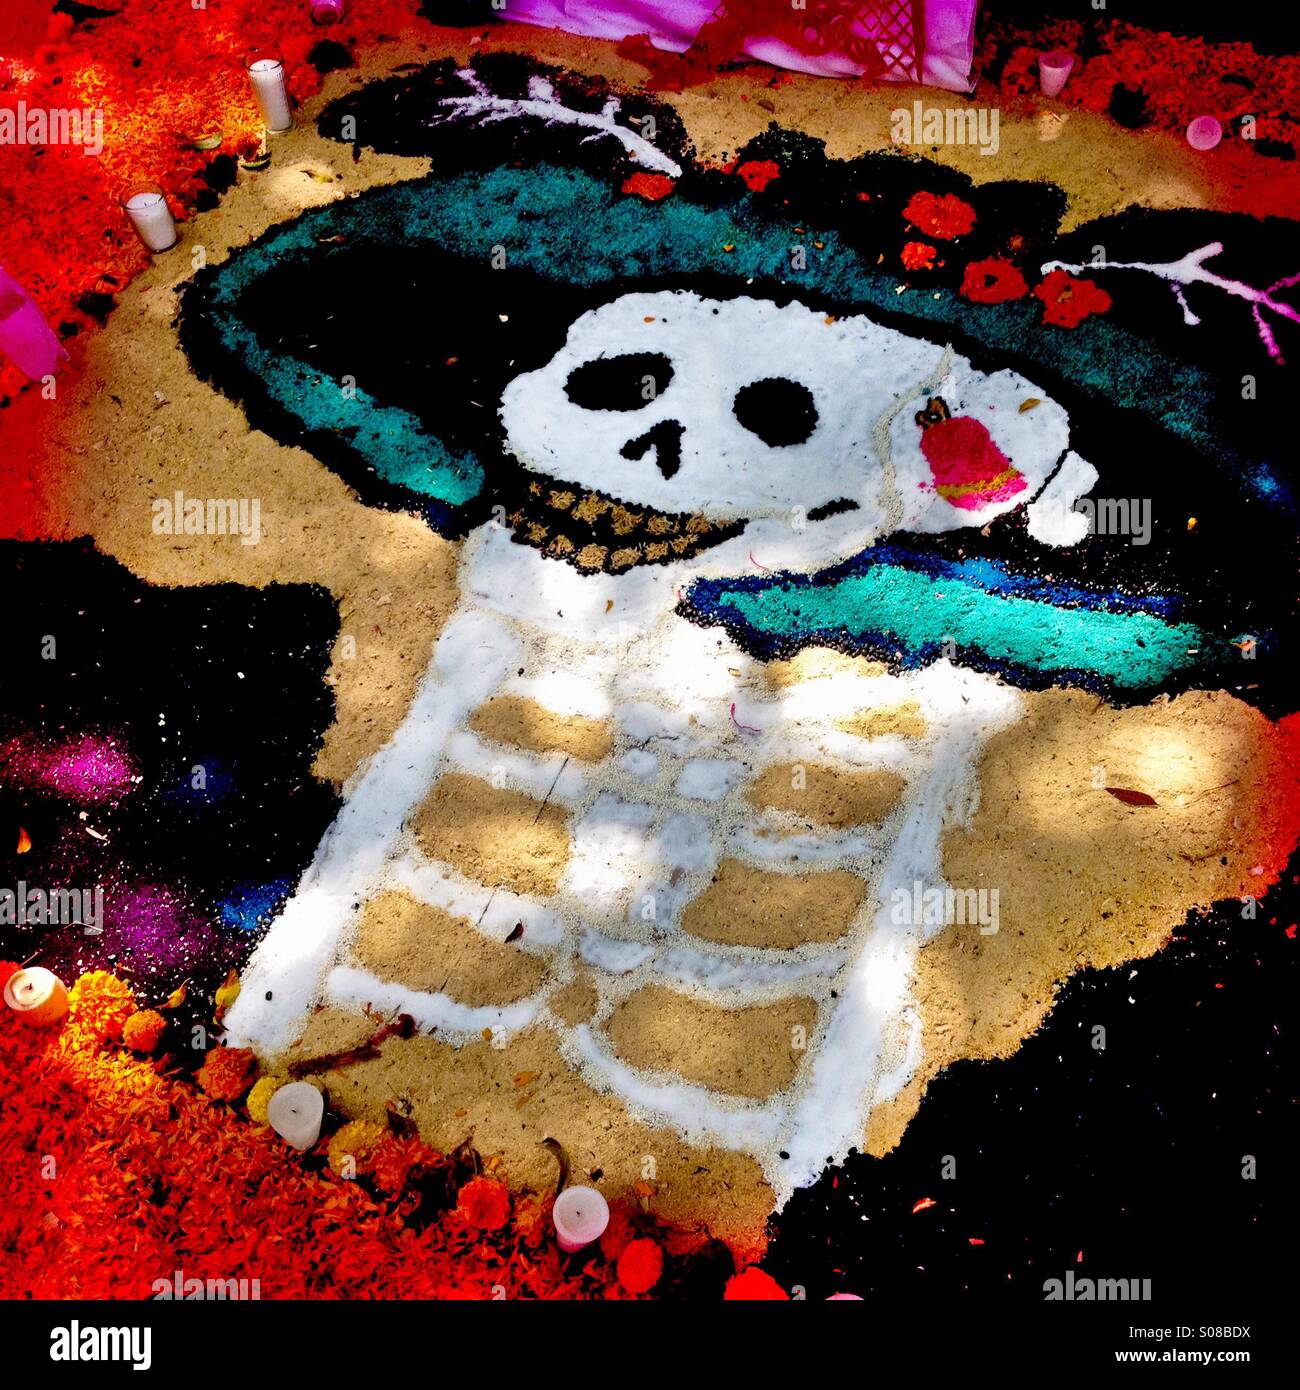 A female skeleton image made of sand, representing La Calavera Catrina, forms a part of the public altar seen on the street during the celebrations of the Day of the Dead in Morelia, Mexico. Stock Photo